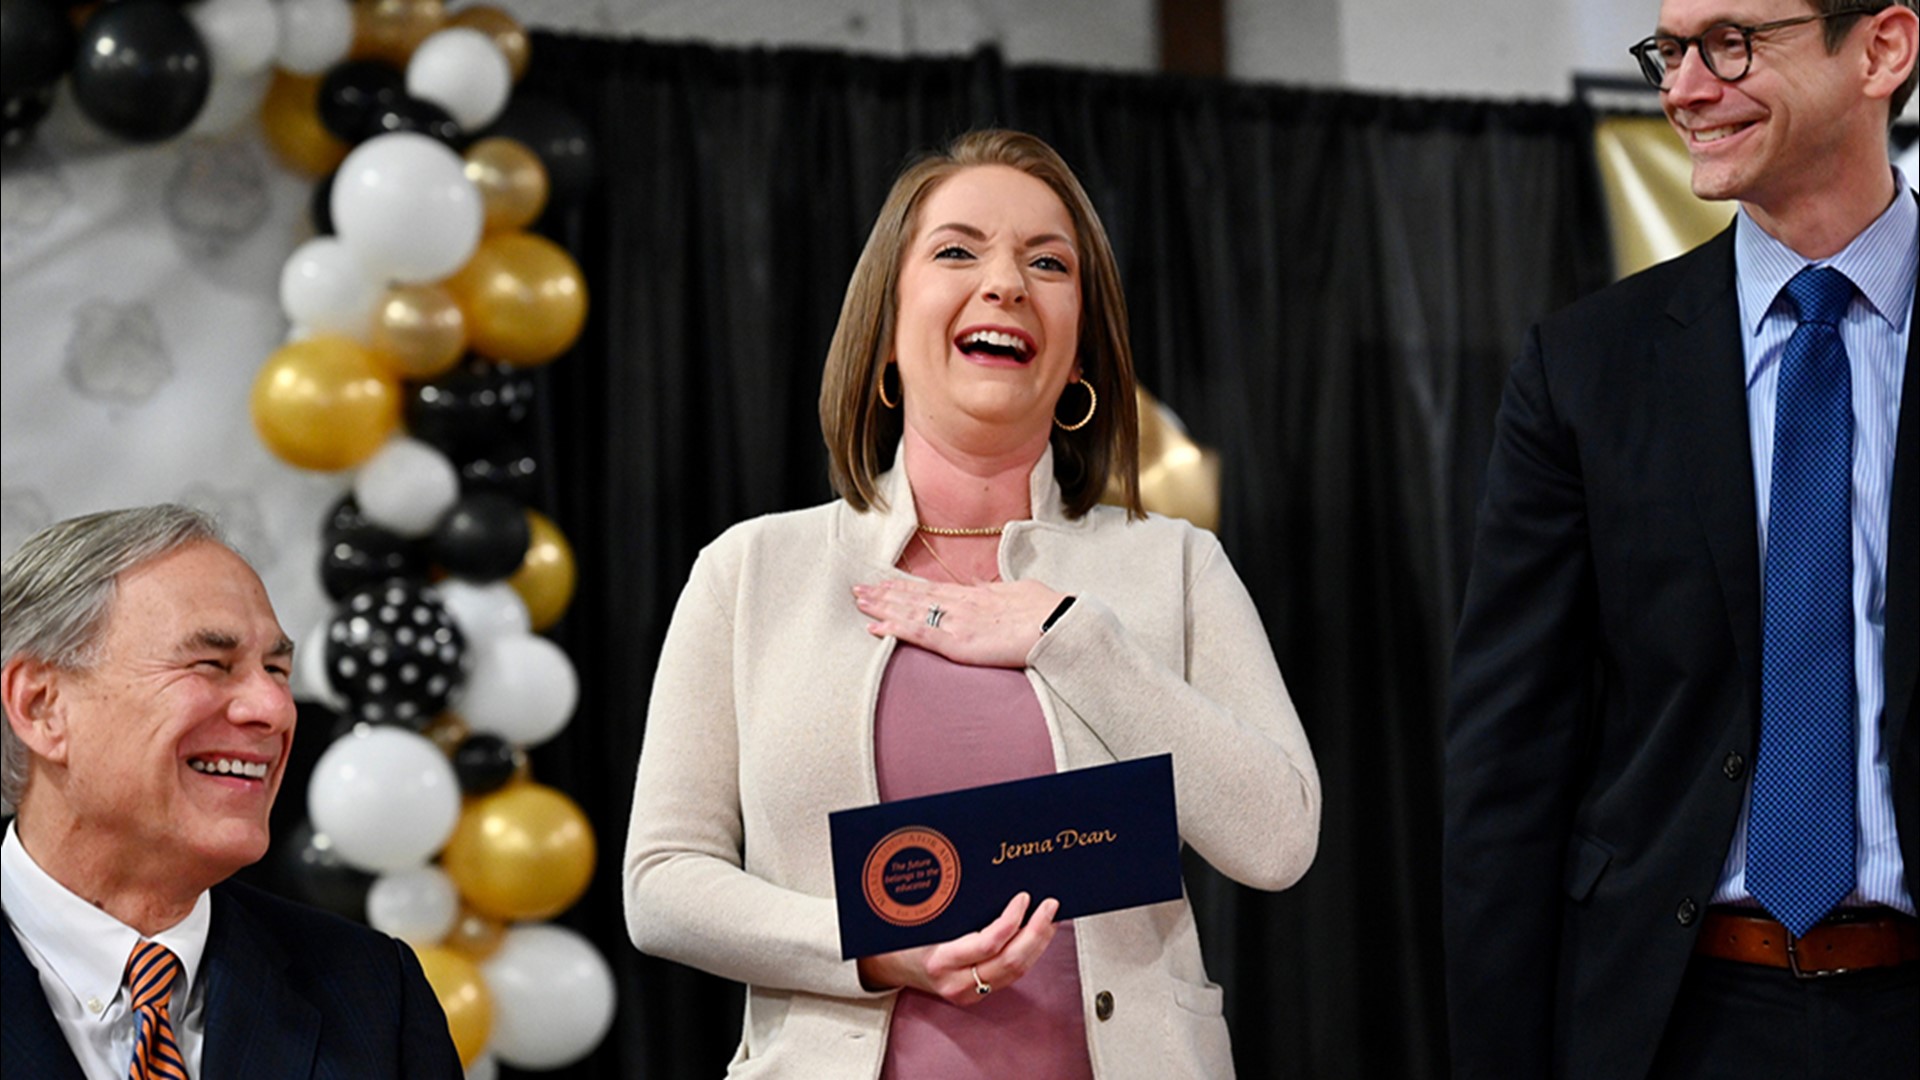 Jenna Dean was a winner of the 2023 Milken Educator Award and received a $25,000 check as a thank you for going above and beyond to educate future leaders.